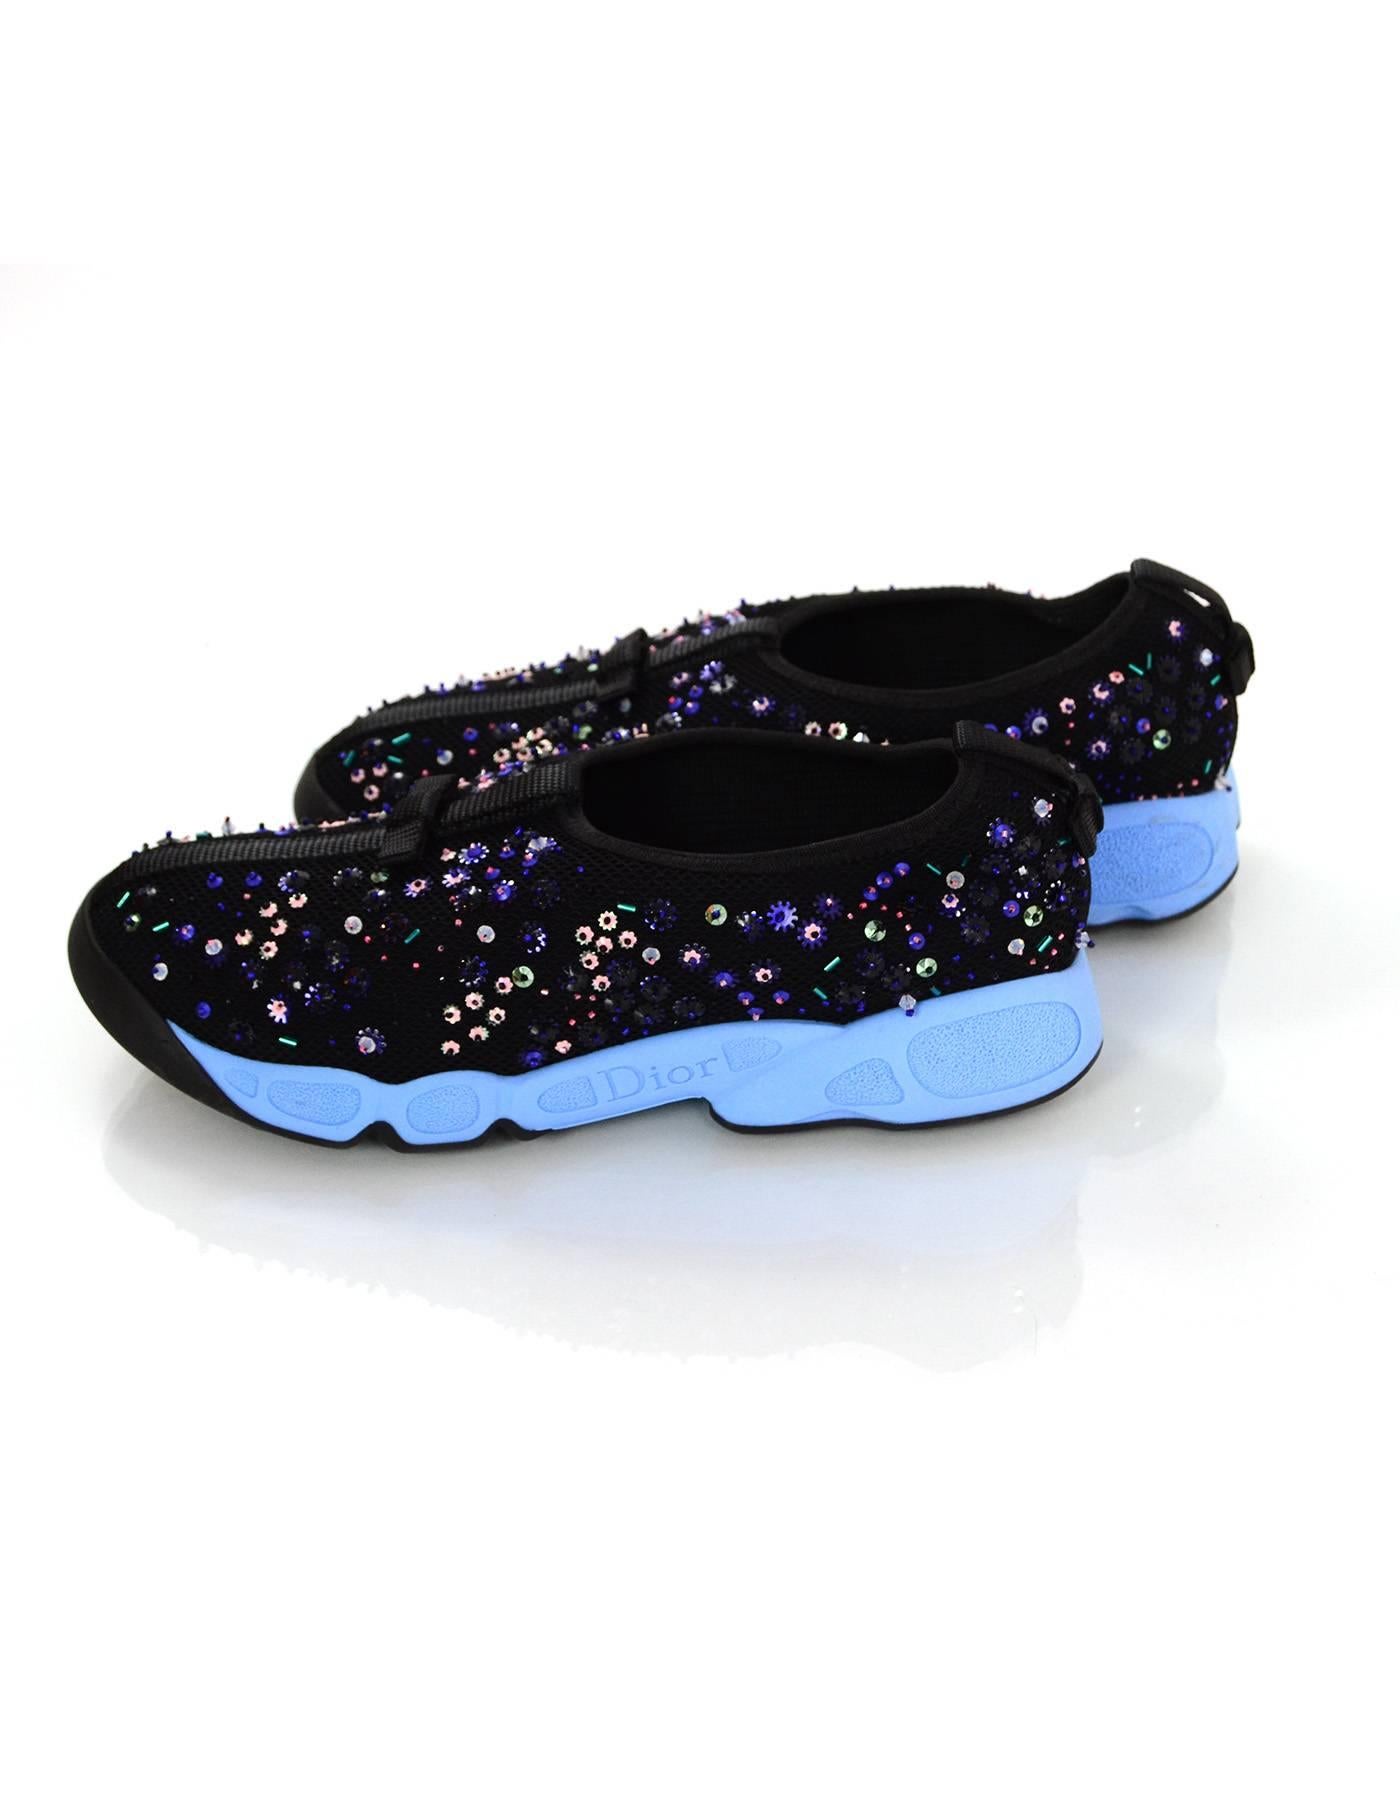 Christian Dior Black and Blue Beaded Fusion Sneakers Sz 38.5 In Excellent Condition In New York, NY